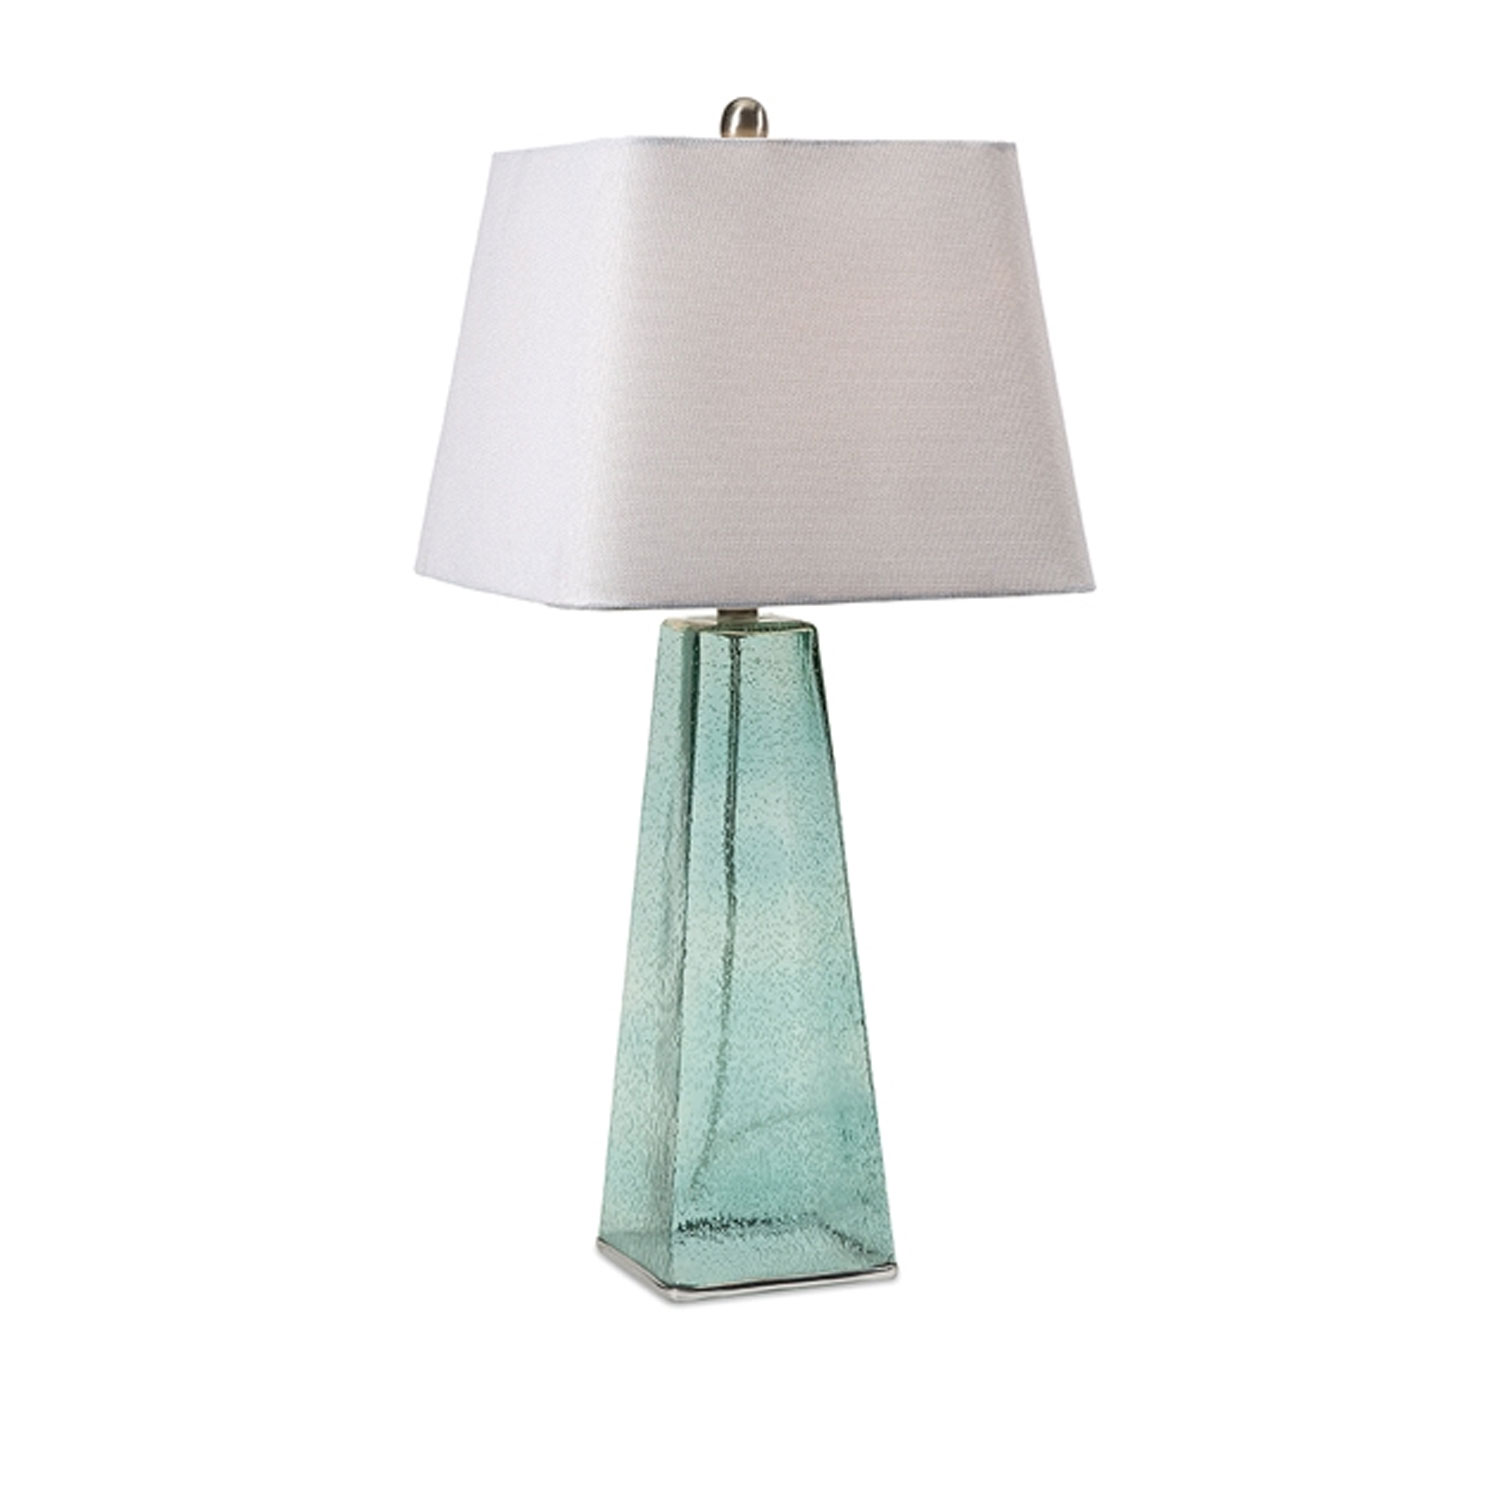 seeded glass table lamp